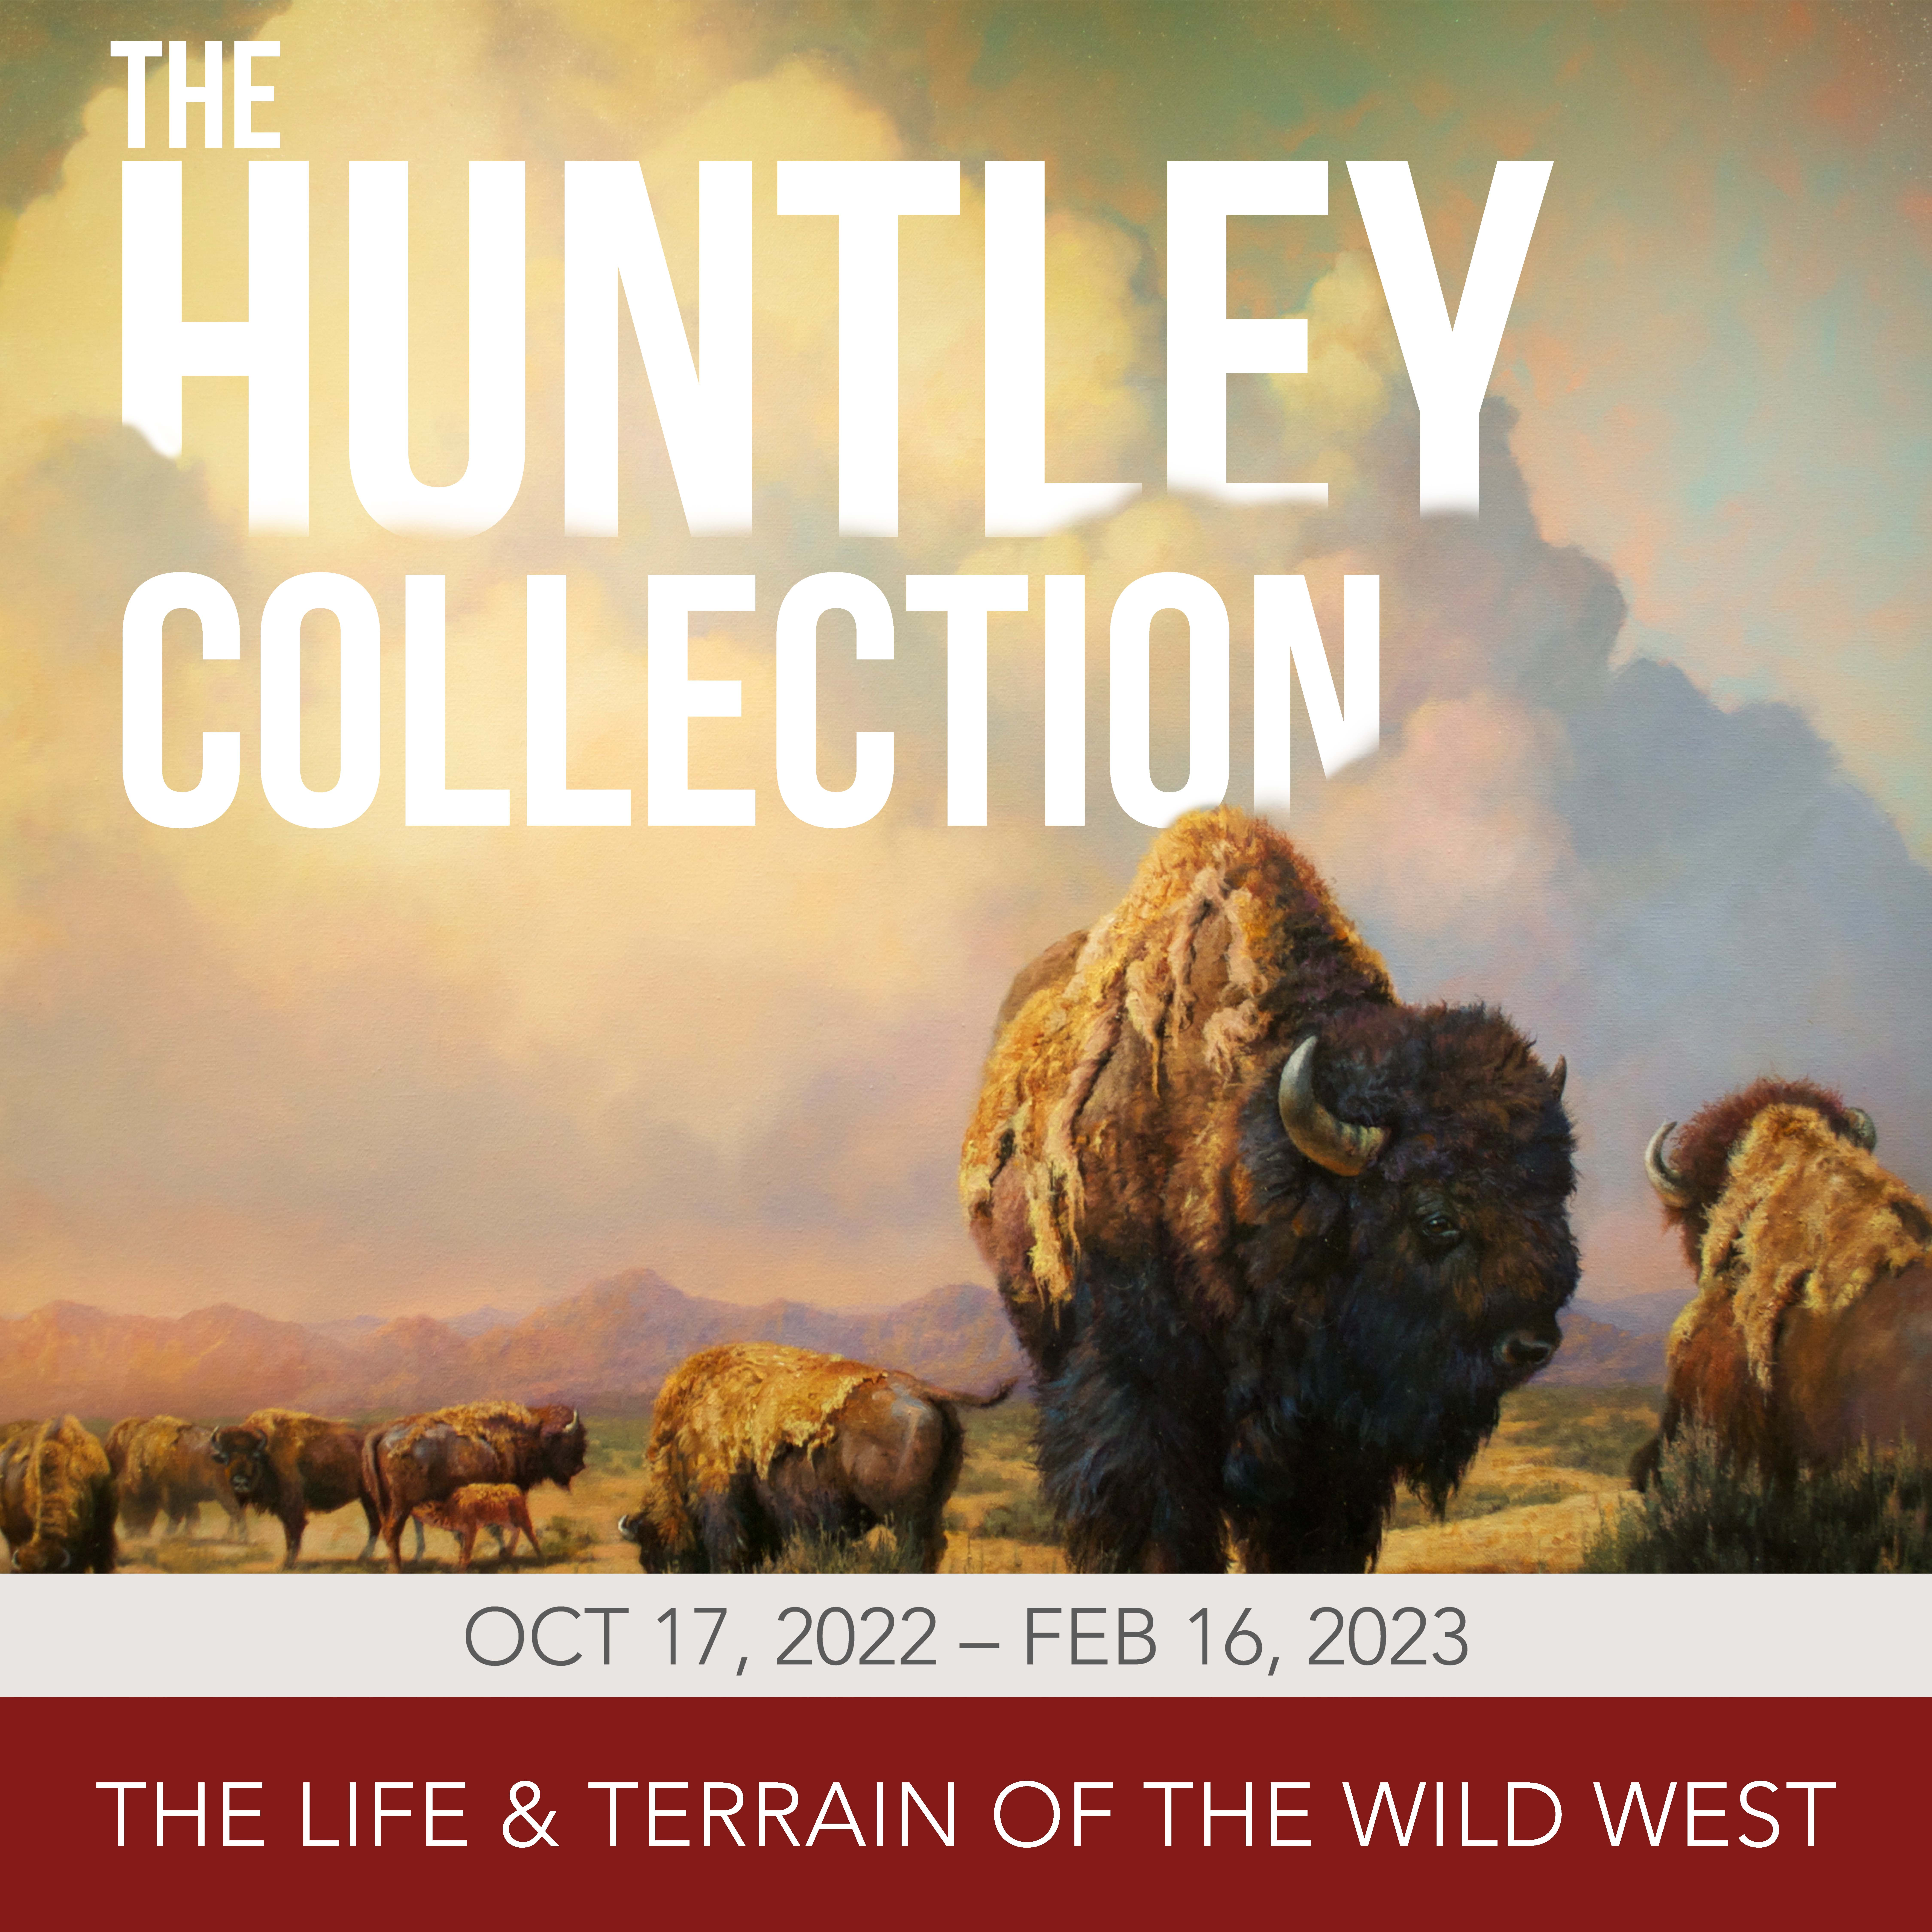  Our upcoming exhibition, "Selections from the Don B. Huntley Collection: The Life & Terrain of the Wild West Coming" is opening soon!